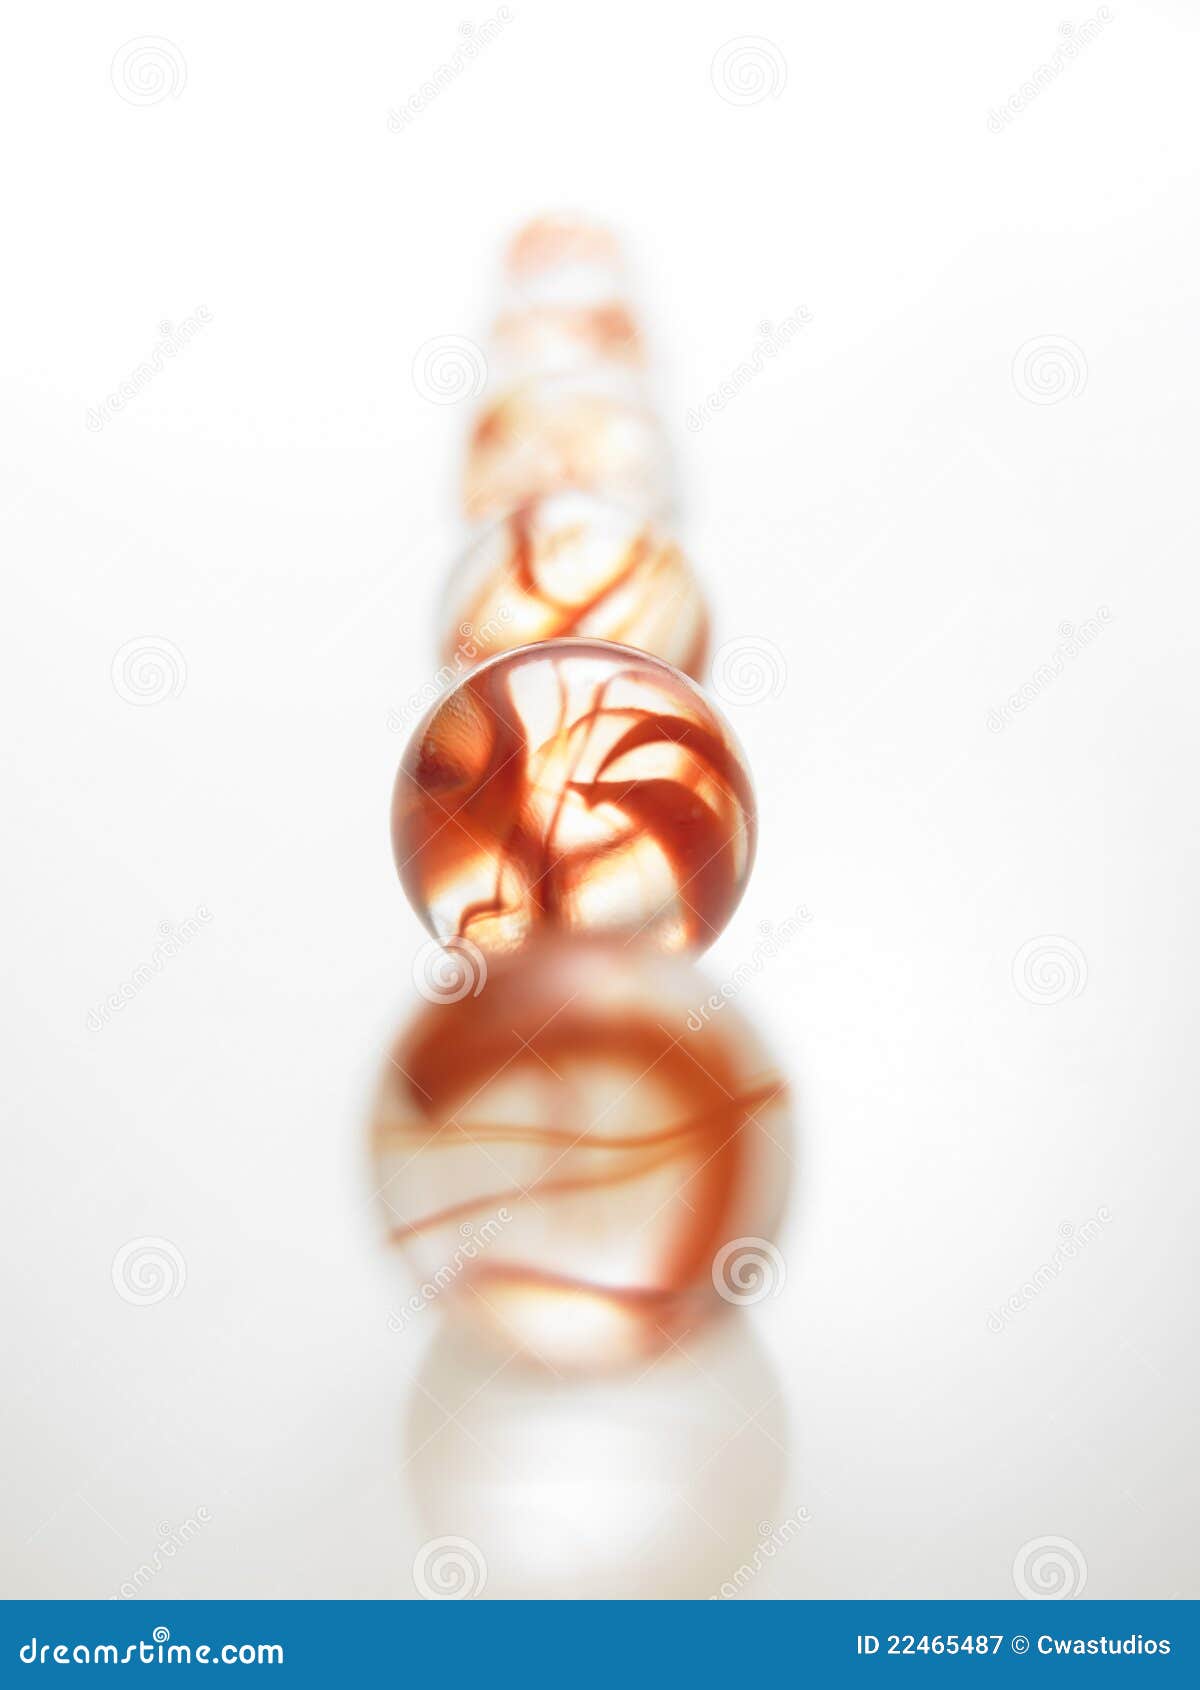 A row of glass Red marbles stock image. Image of reflective 22465487